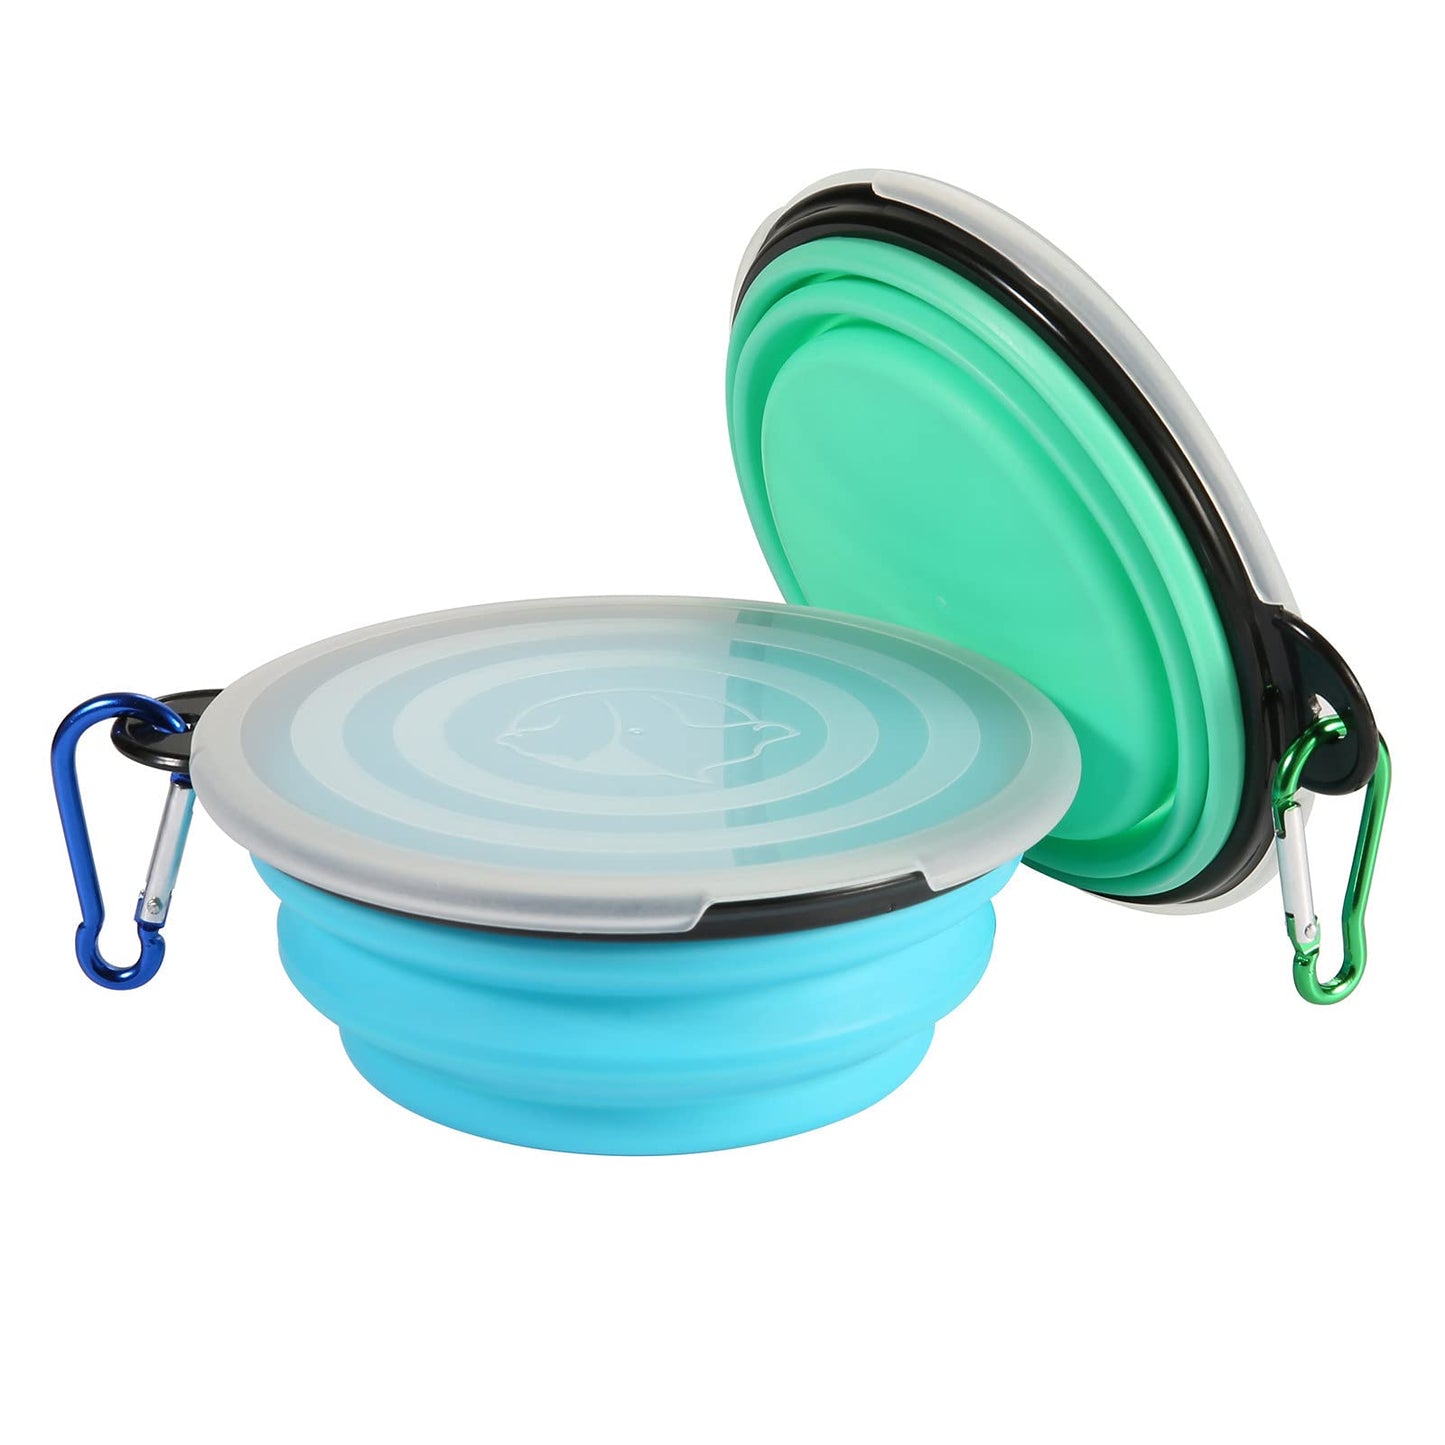 SLSON Collapsible Bowl with Cover Lids,2 Pack Dog Travel Bowls Portable Foldable Cat Water Dish Bowl for Pets Walking Parking Camping (Light Blue and Green, Small)